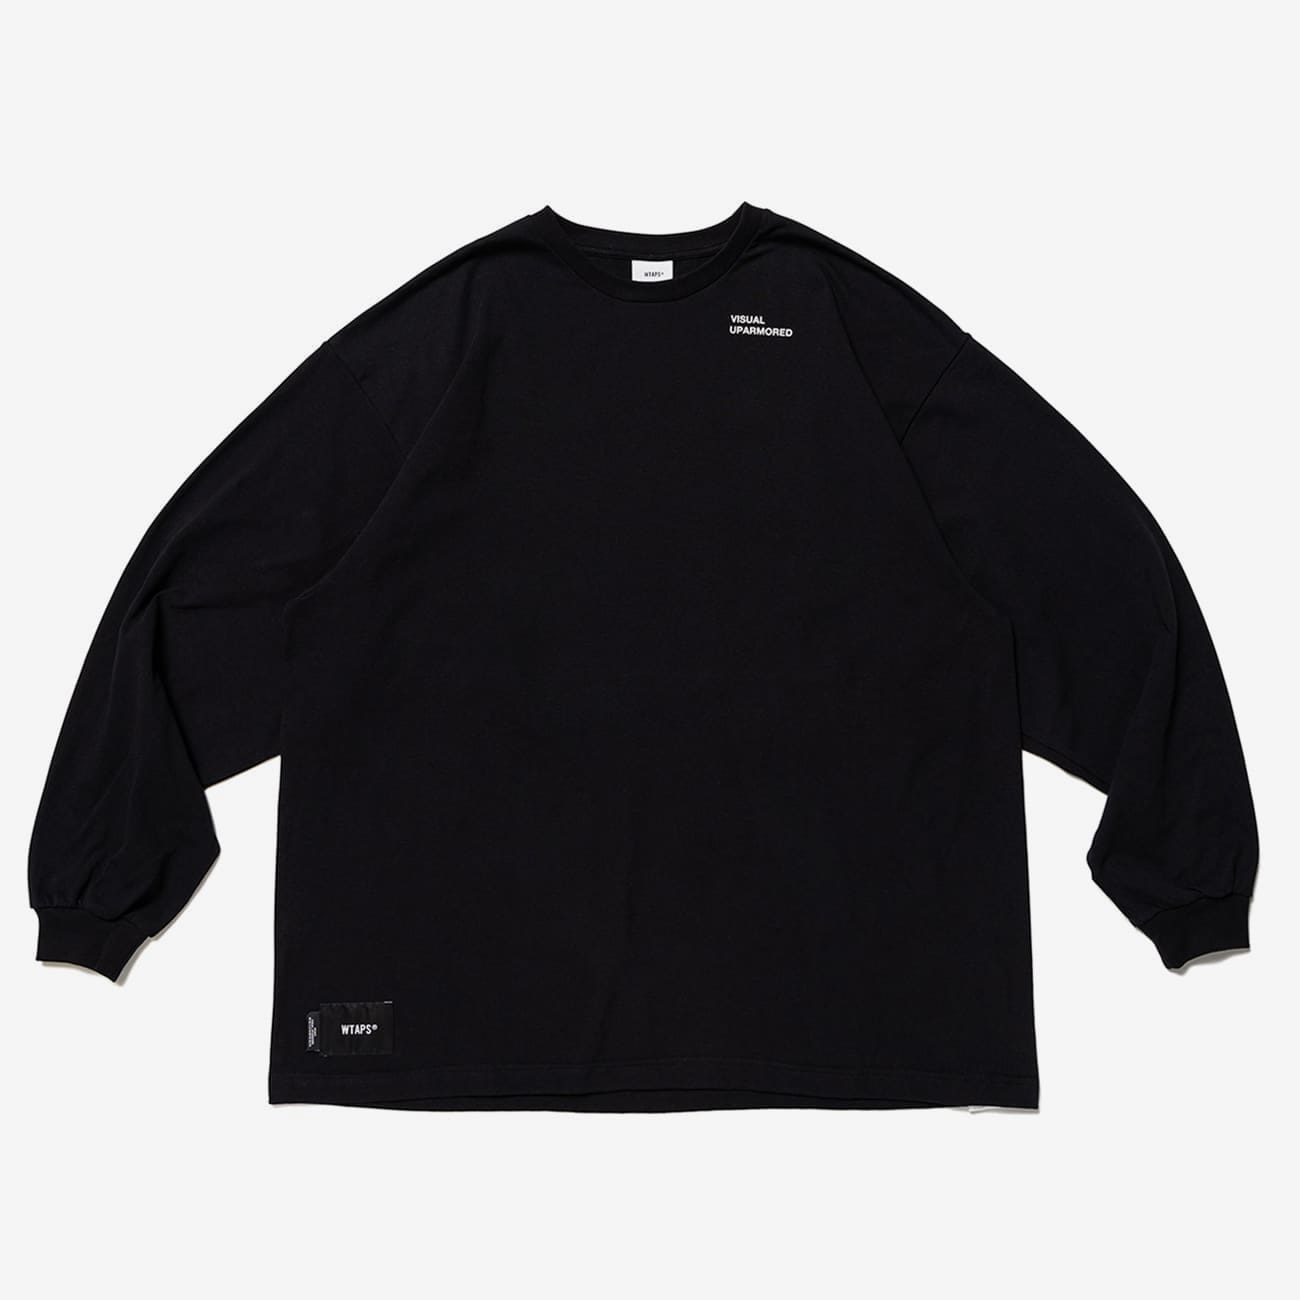 WTAPS　VISUAL UPARMORED / LS COTTON L 03